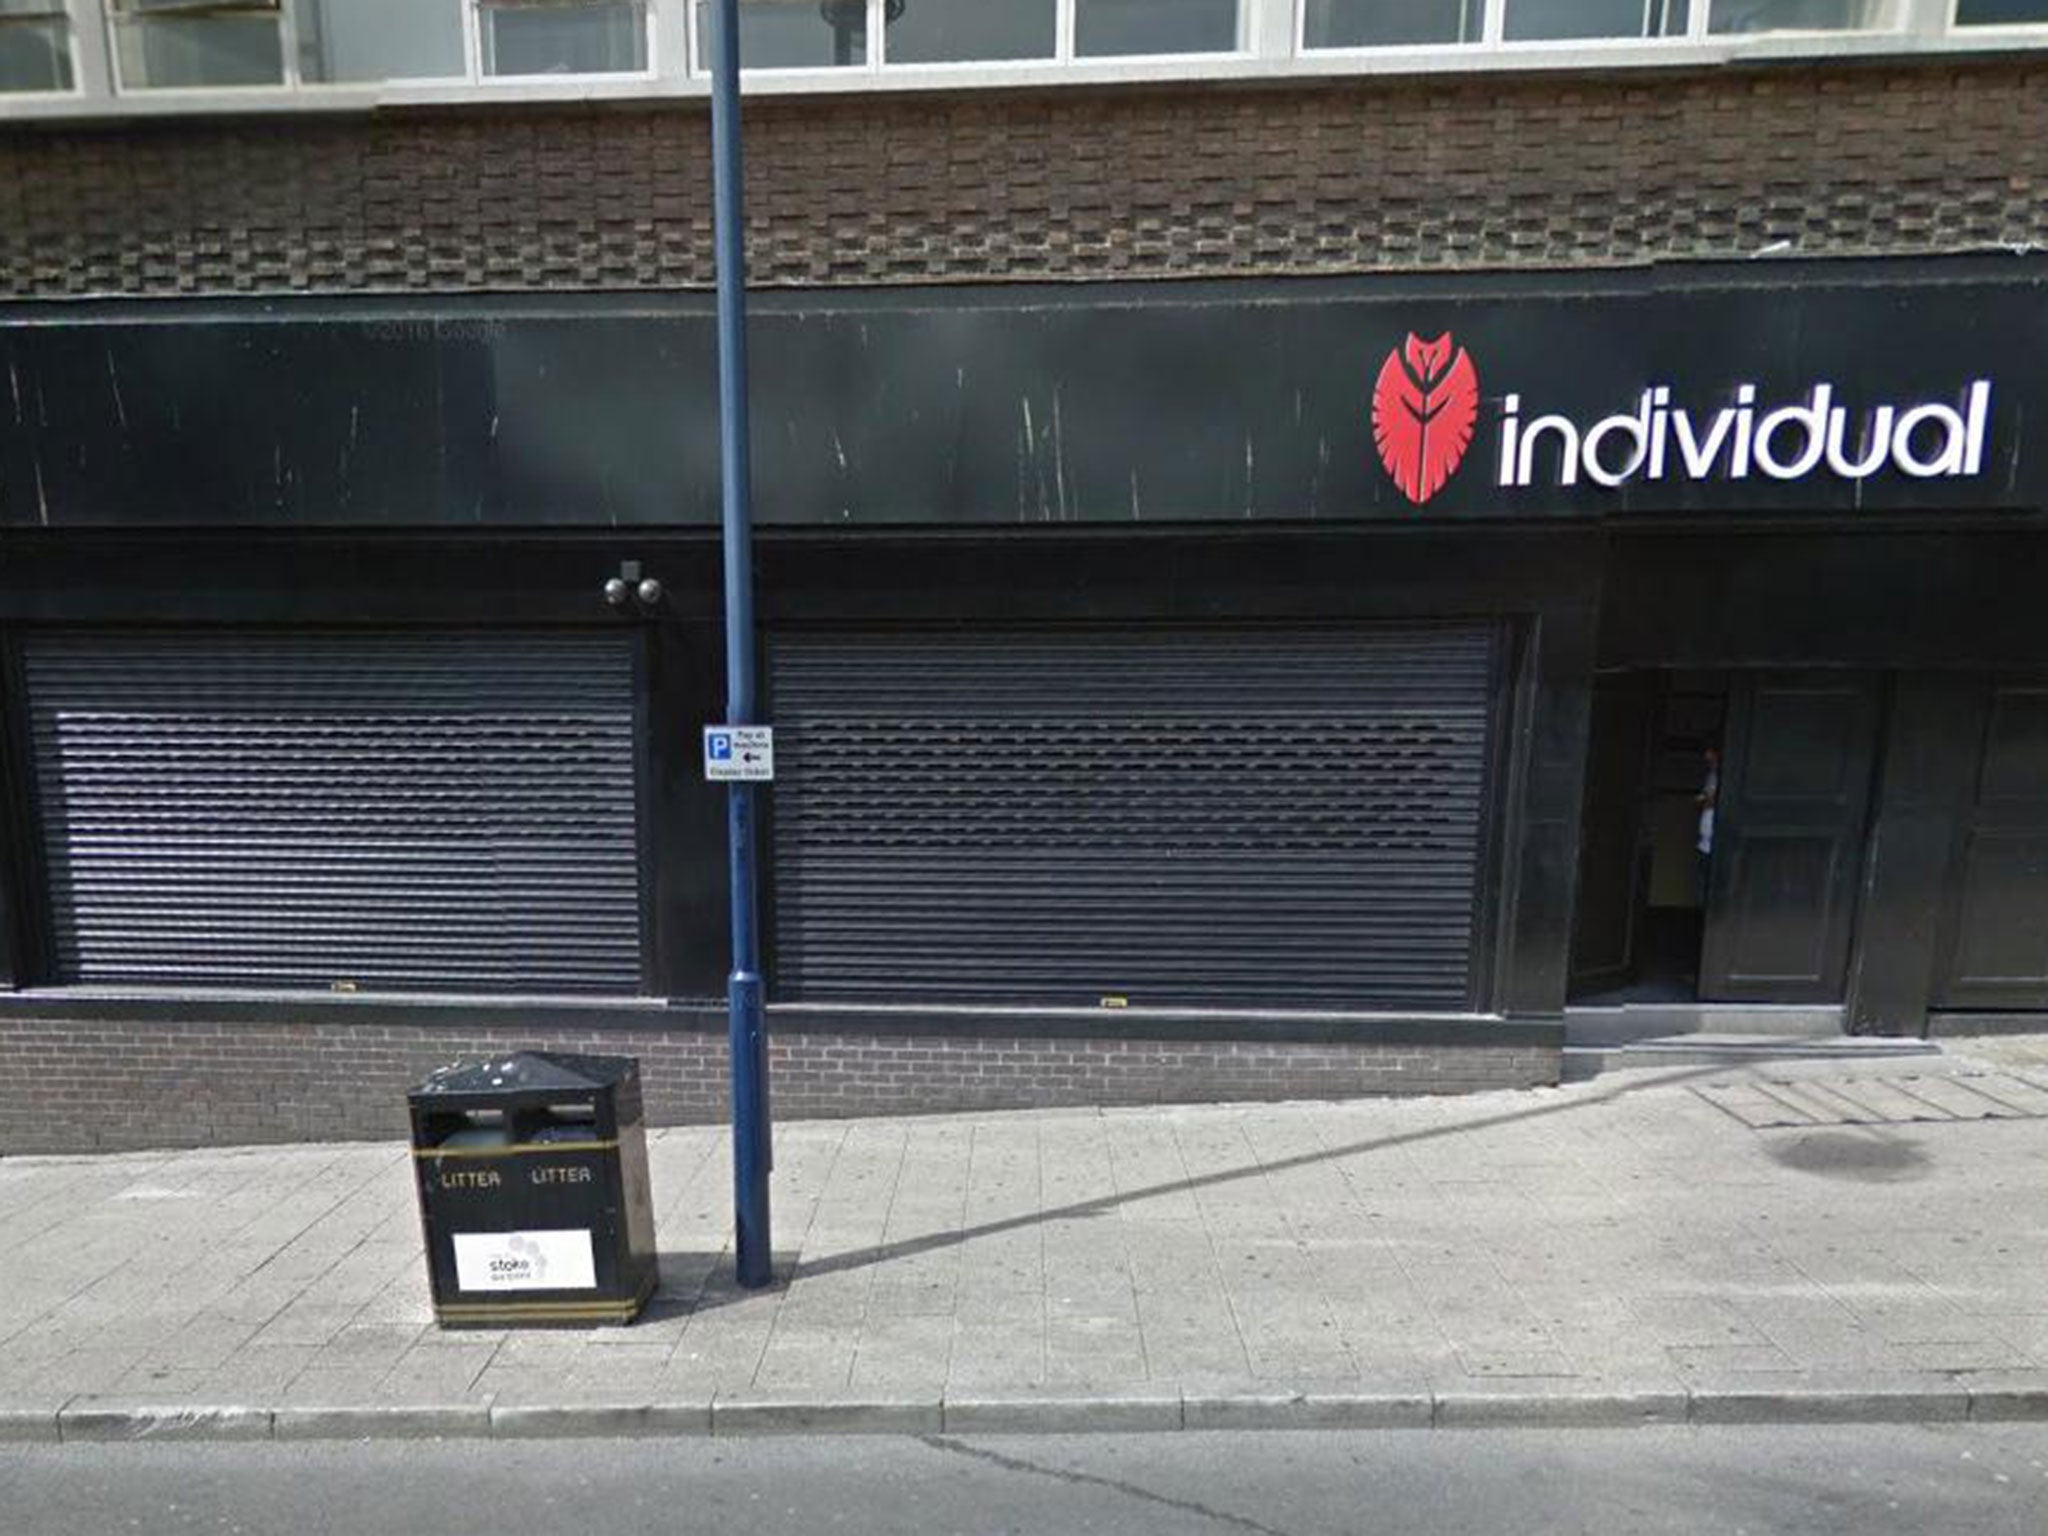 Police were called to a 'disturbance' at Indi Vidual bar in Stoke.